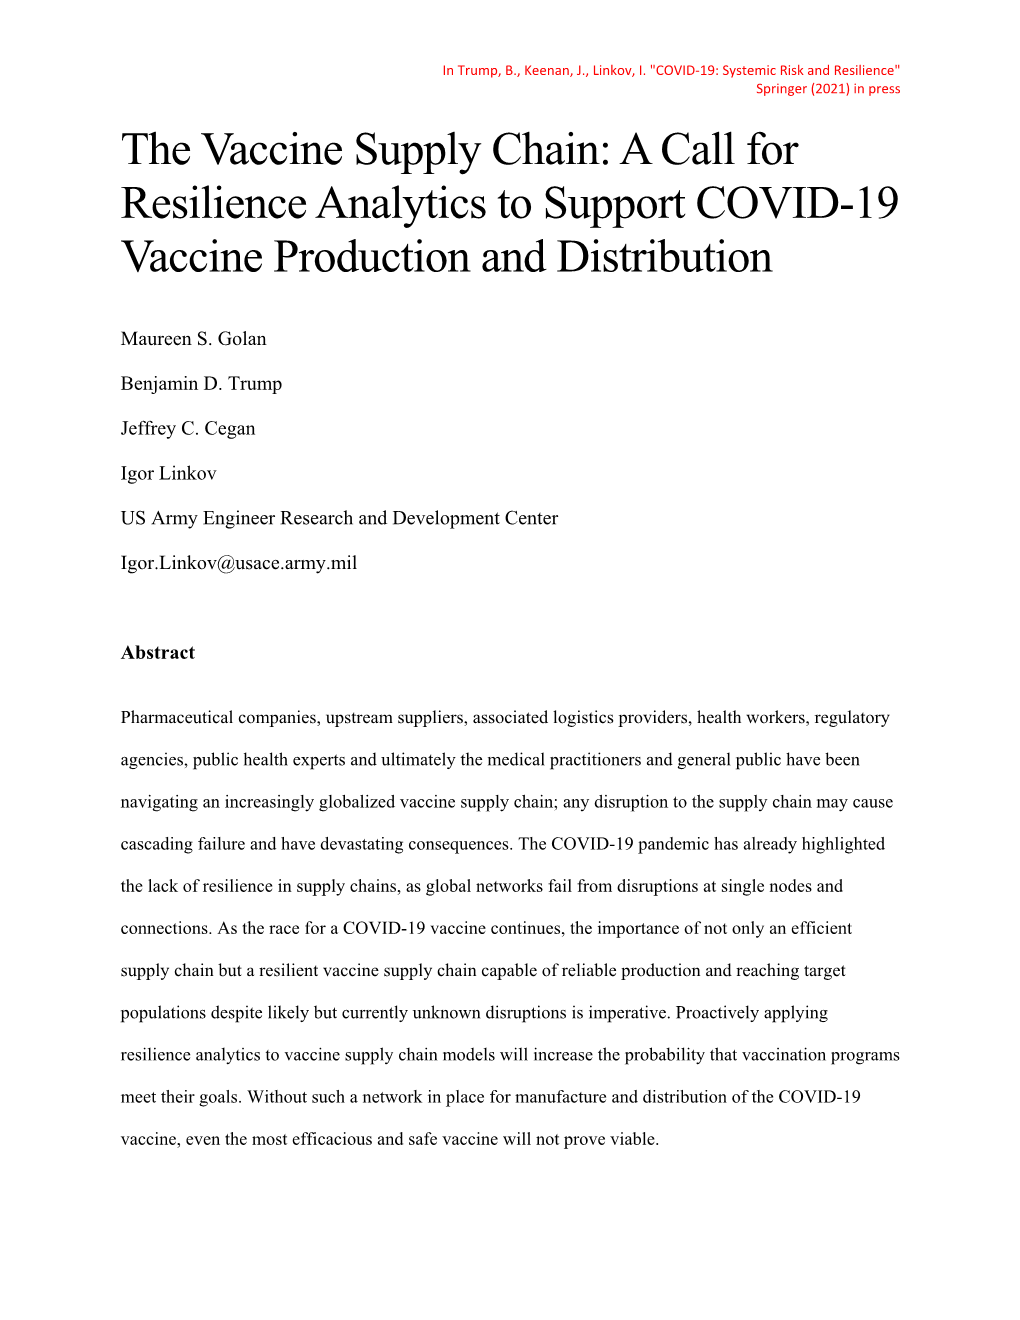 The Vaccine Supply Chain: a Call for Resilience Analytics to Support COVID-19 Vaccine Production and Distribution